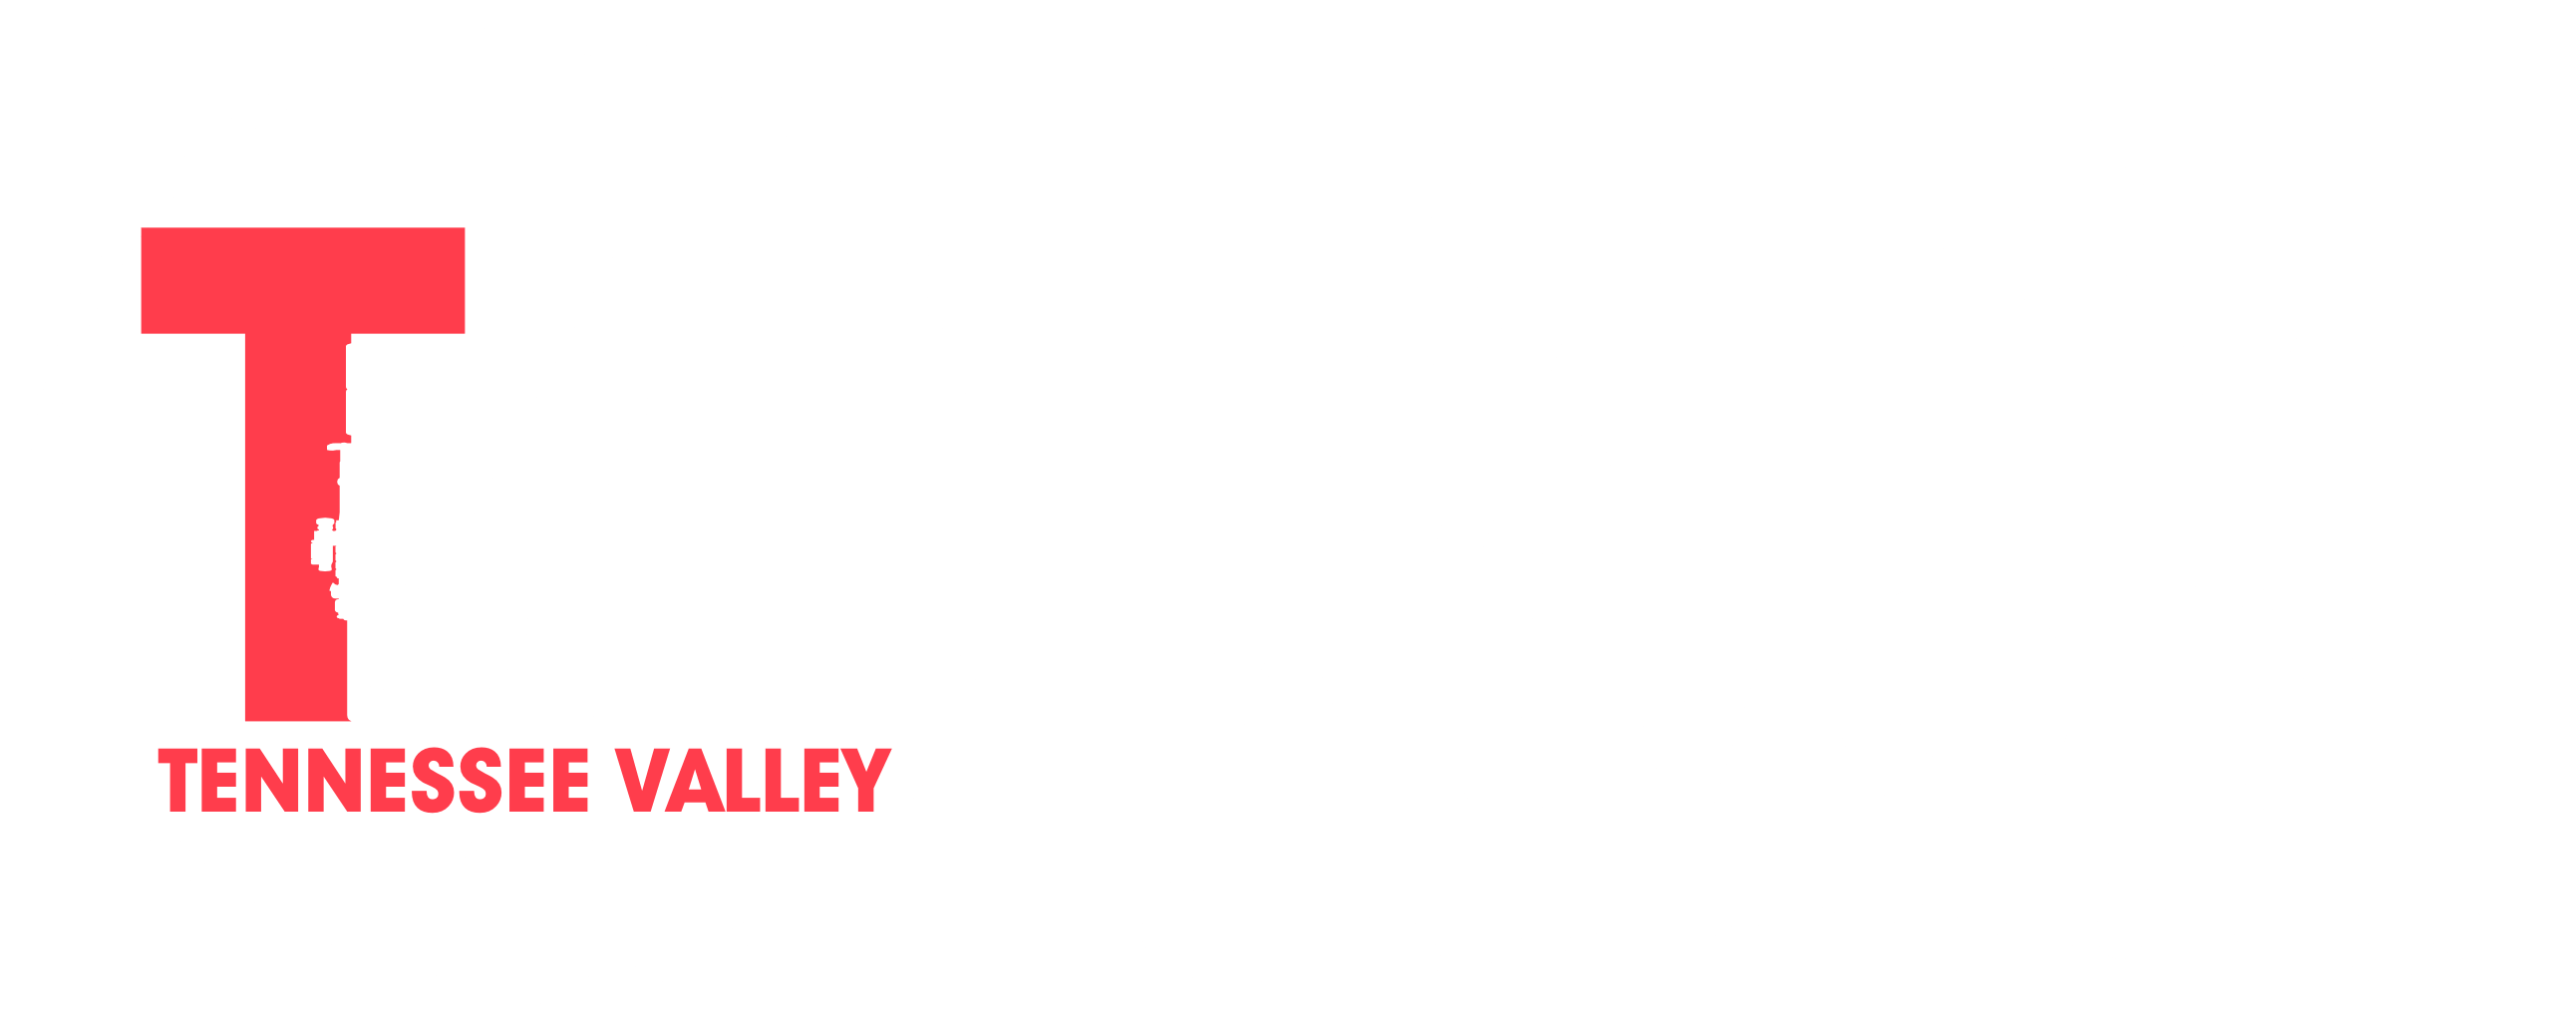 Tennessee Valley Armory